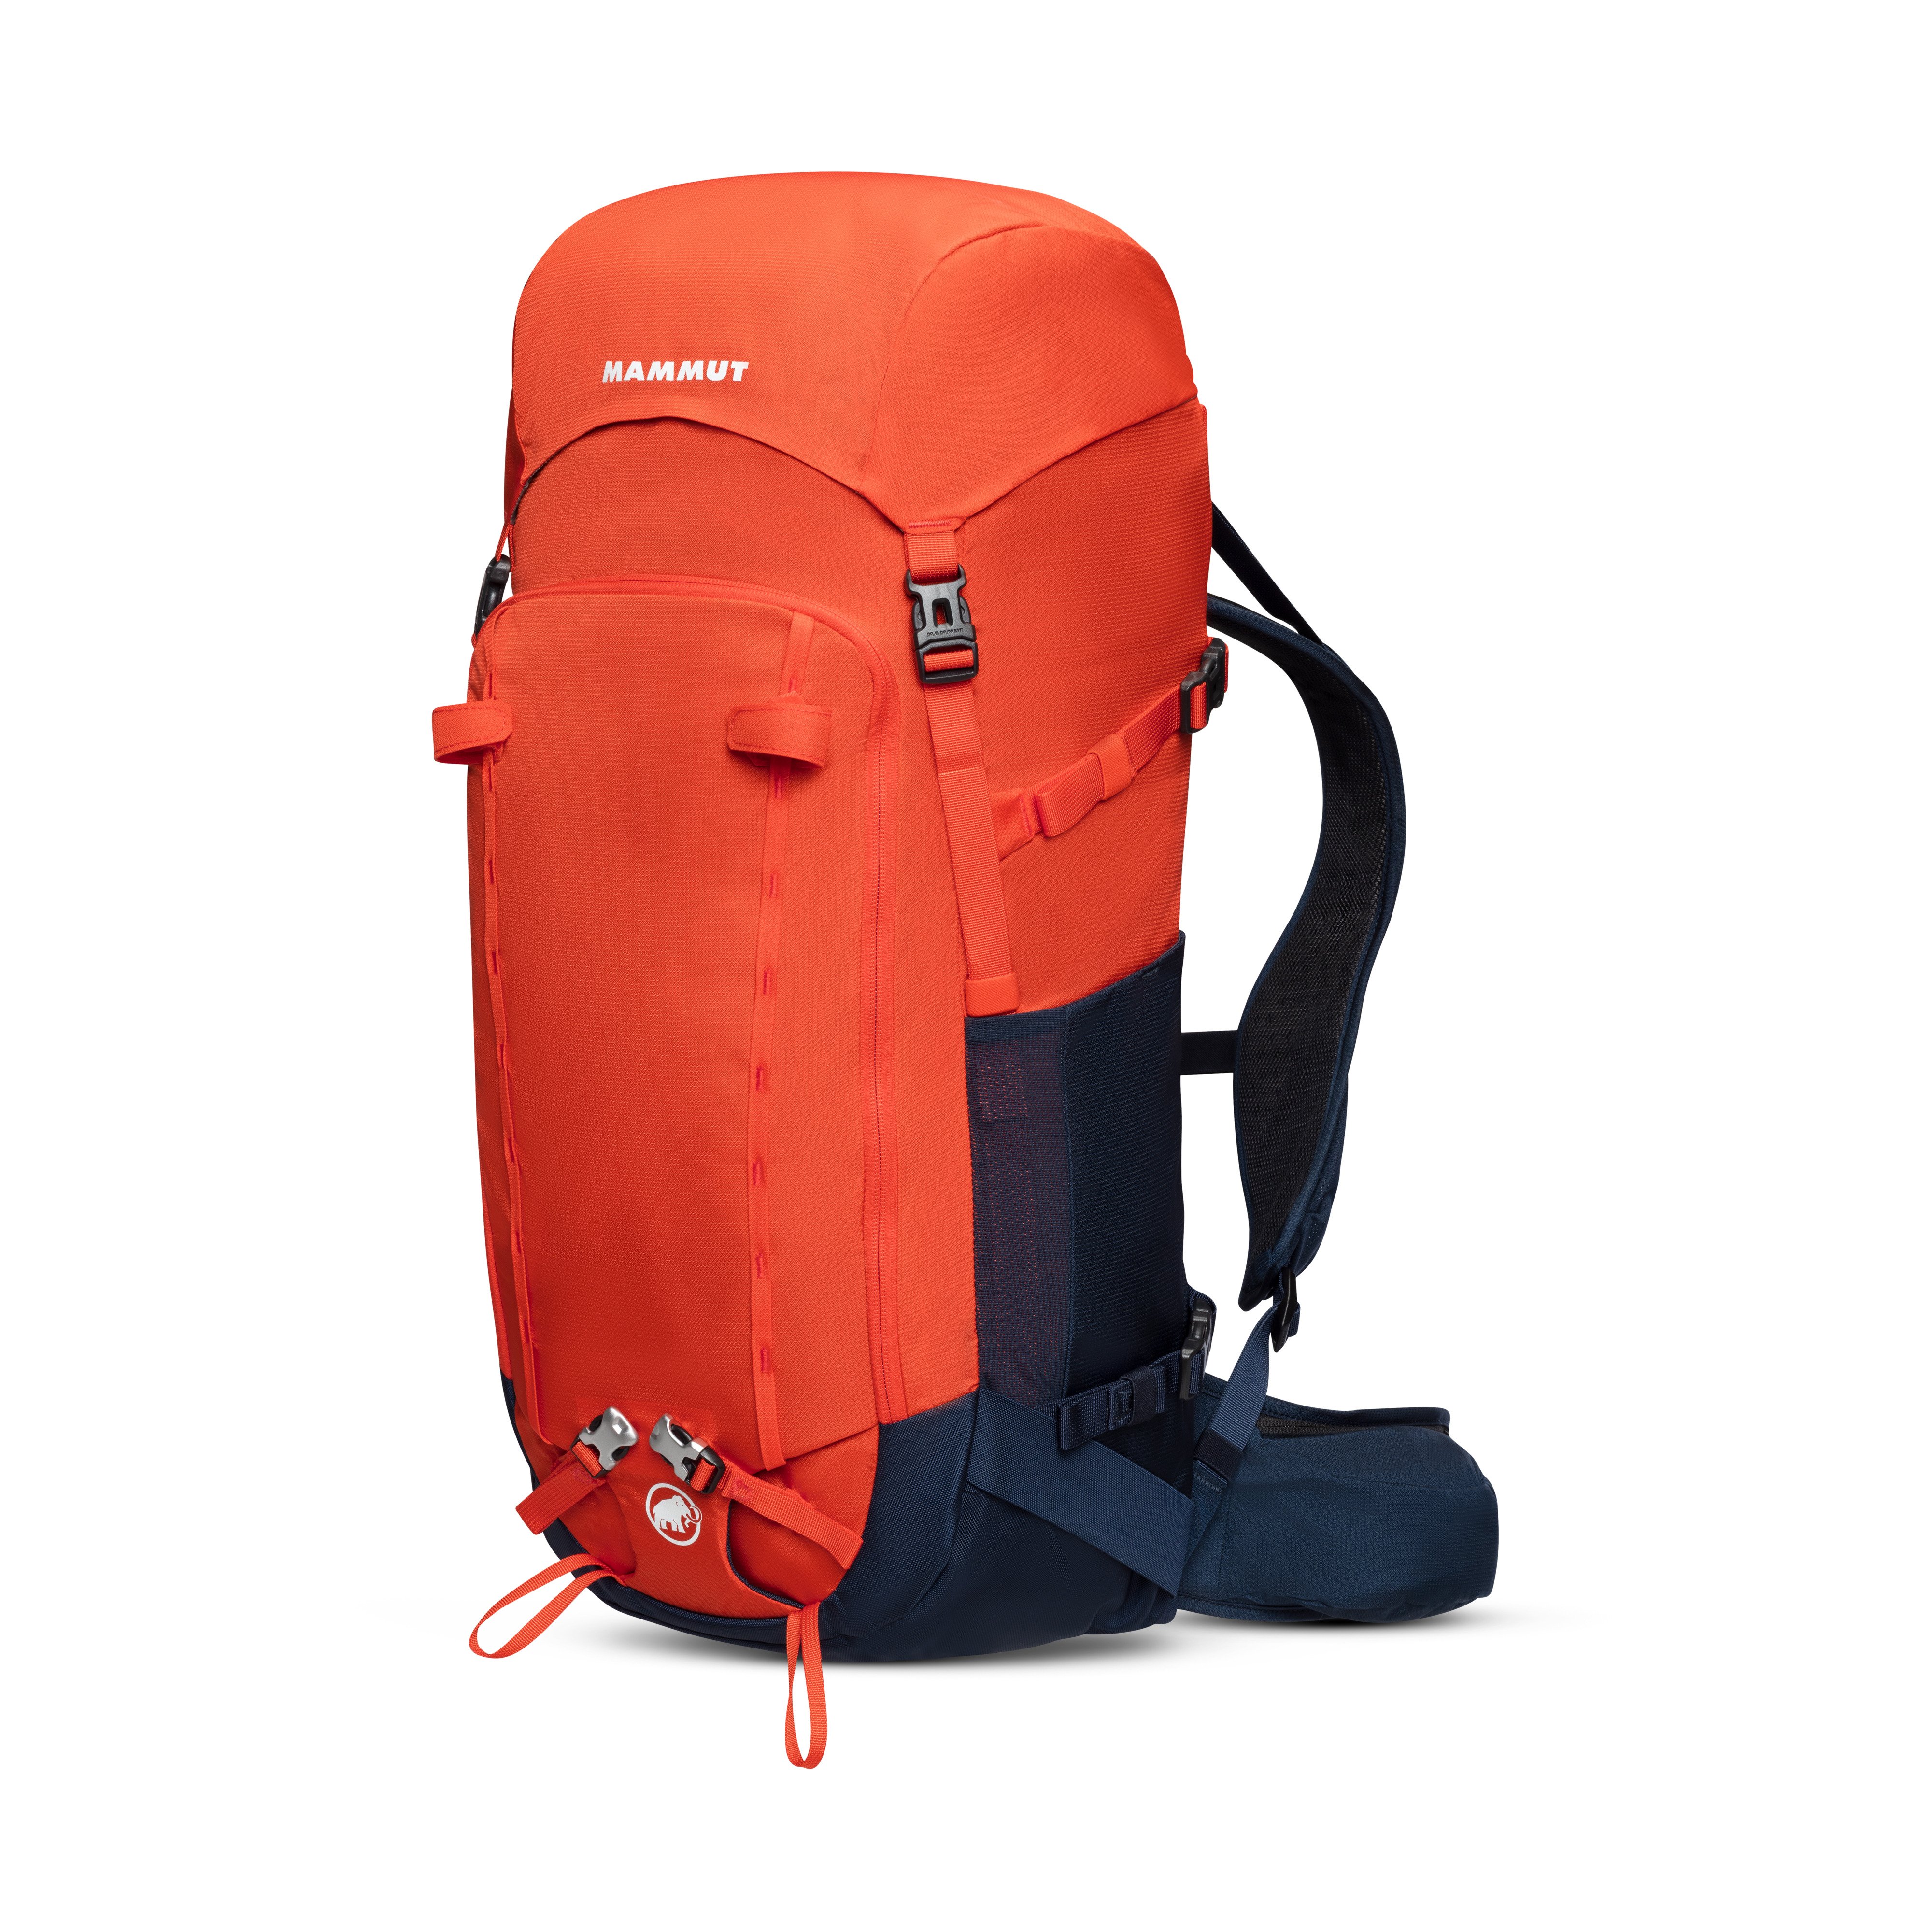 Trion 35 - hot red-marine, 35 L product image